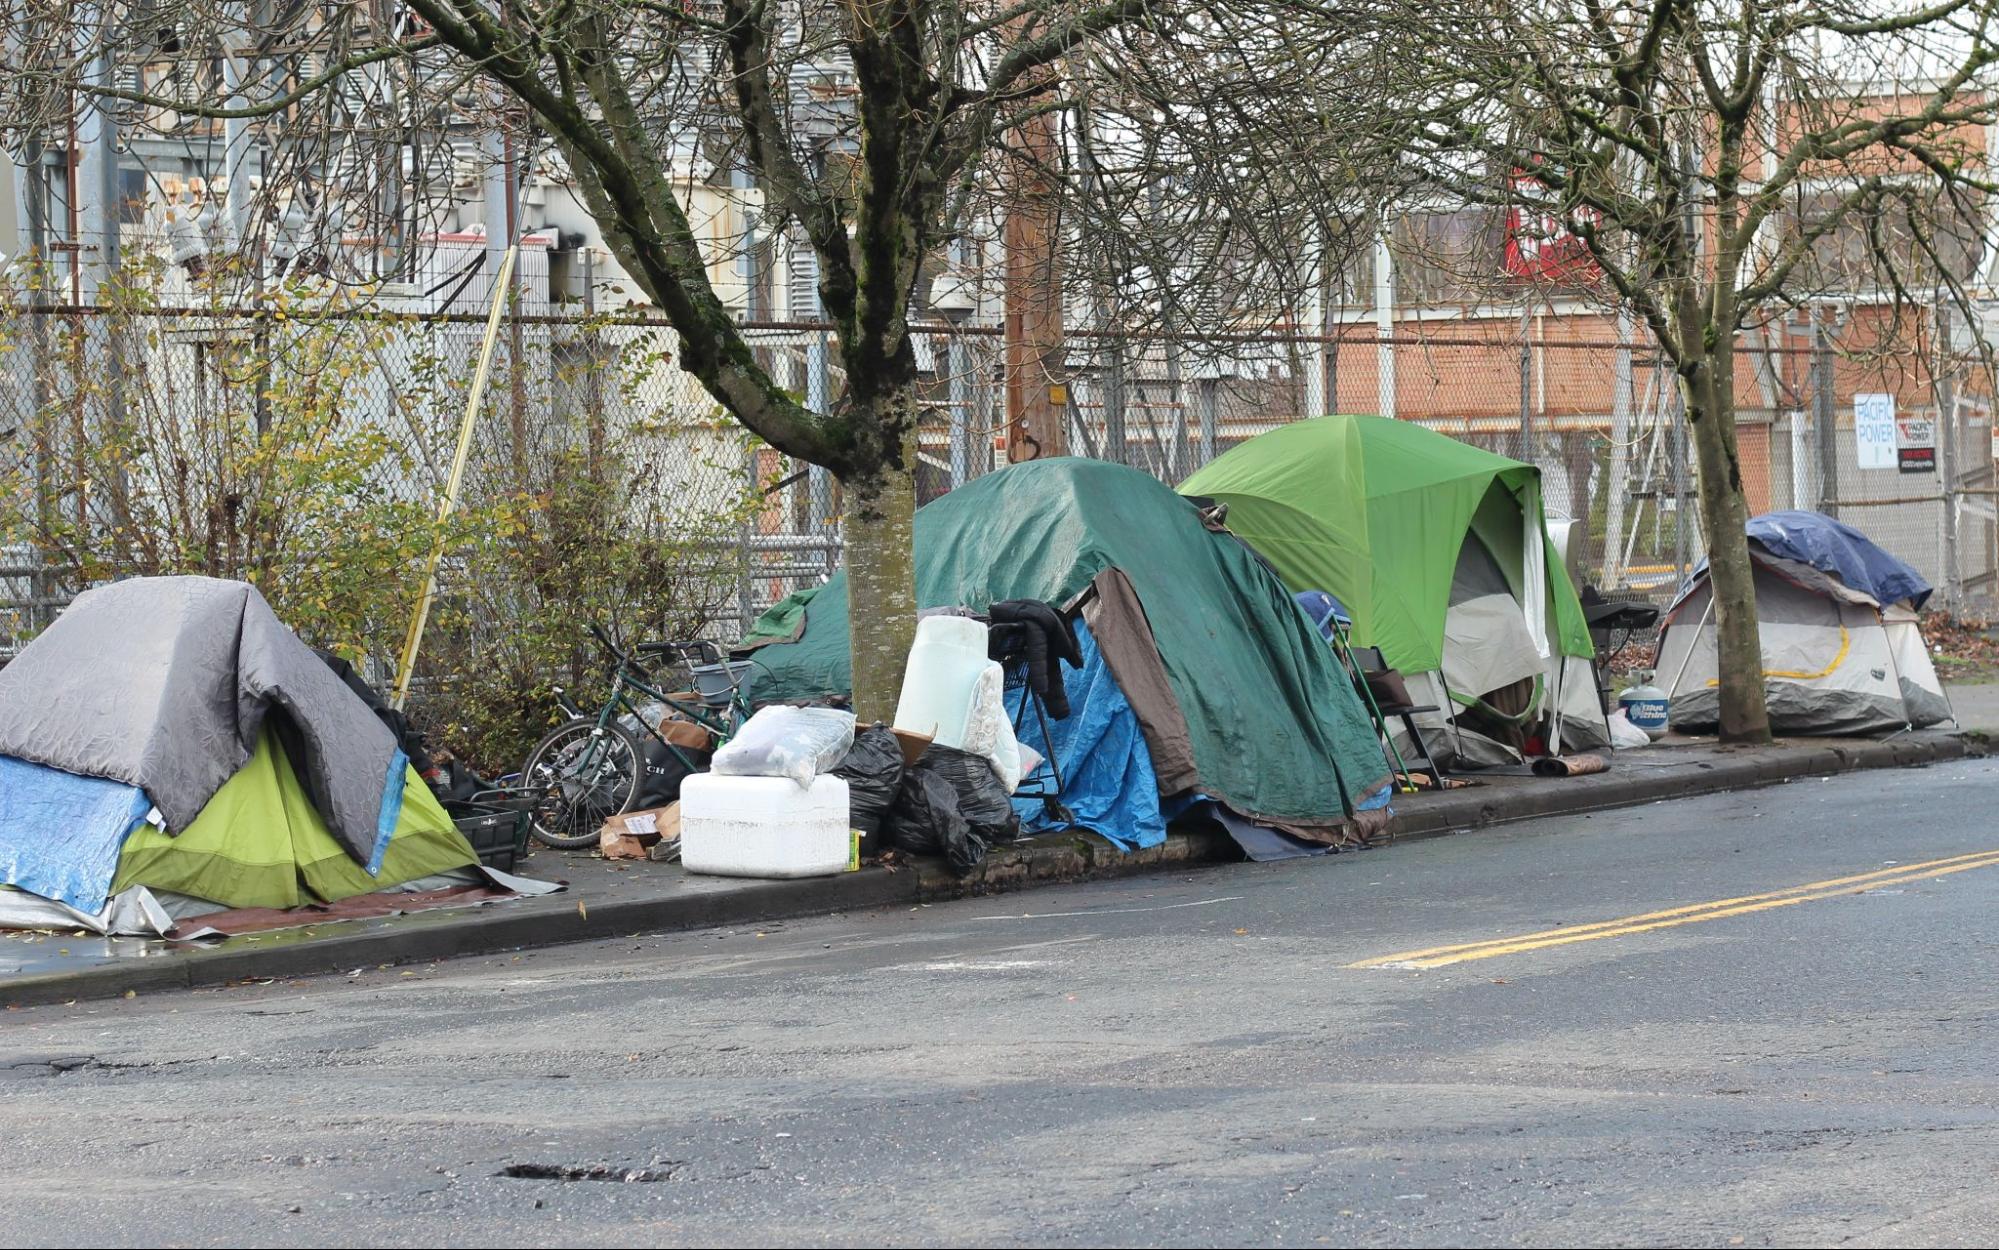 A sidewalk has four worn-looking and make-shift tents set up on the space between a chain link fence and the road.